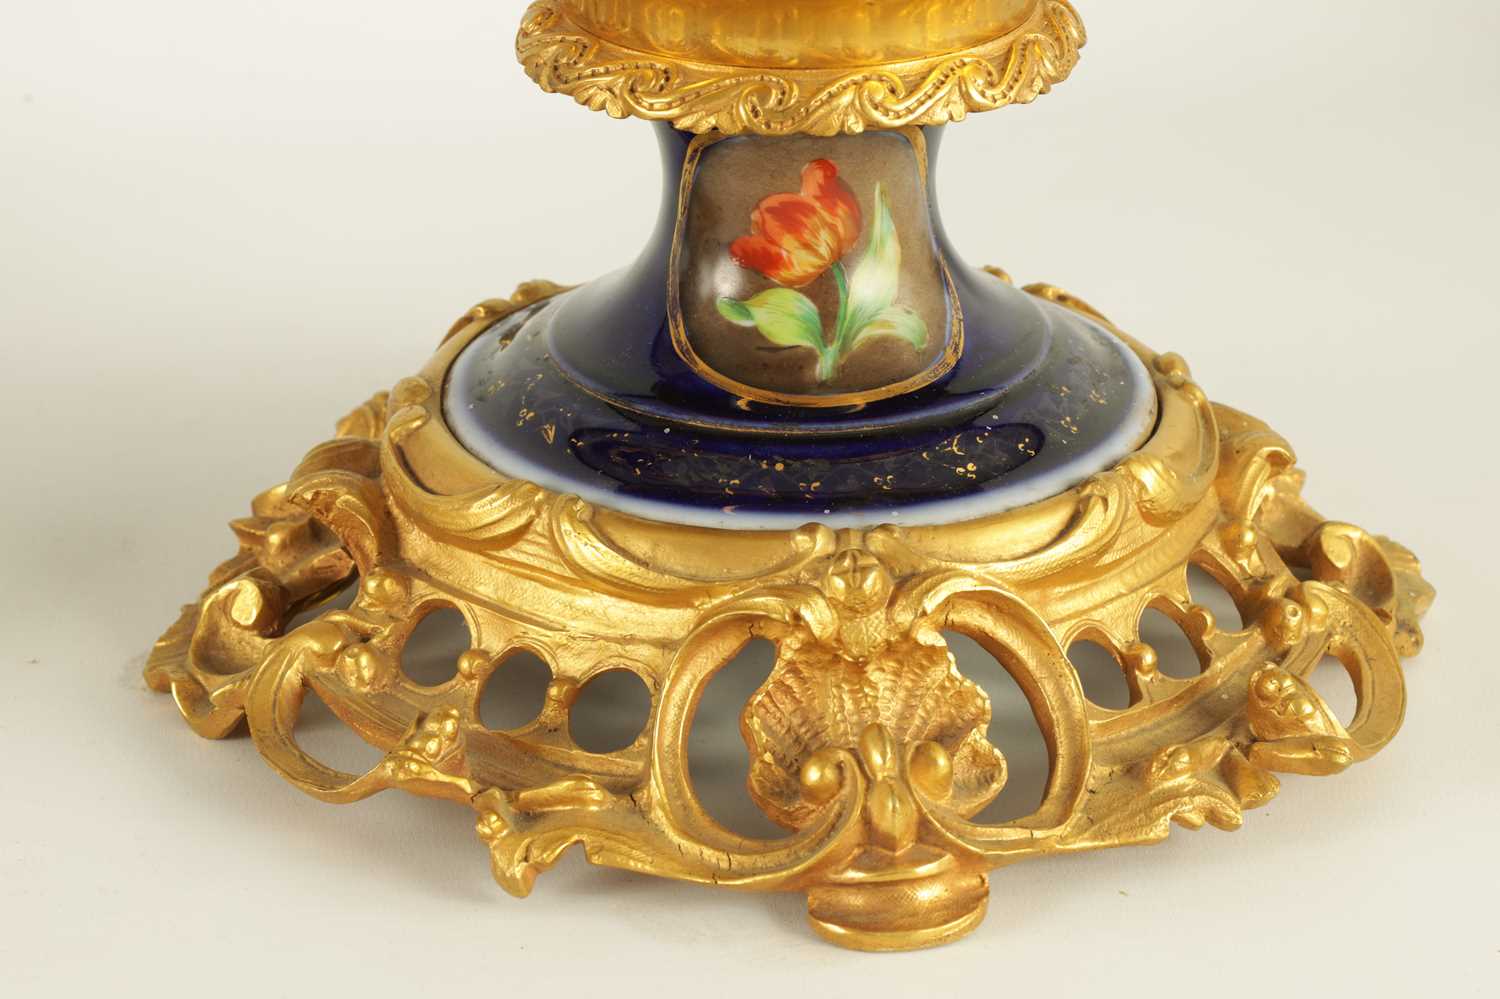 A PAIR OF 19TH CENTURY CONTINENTAL ORMOLU MOUNTED PORCELAIN LAMP BASES - Image 10 of 13